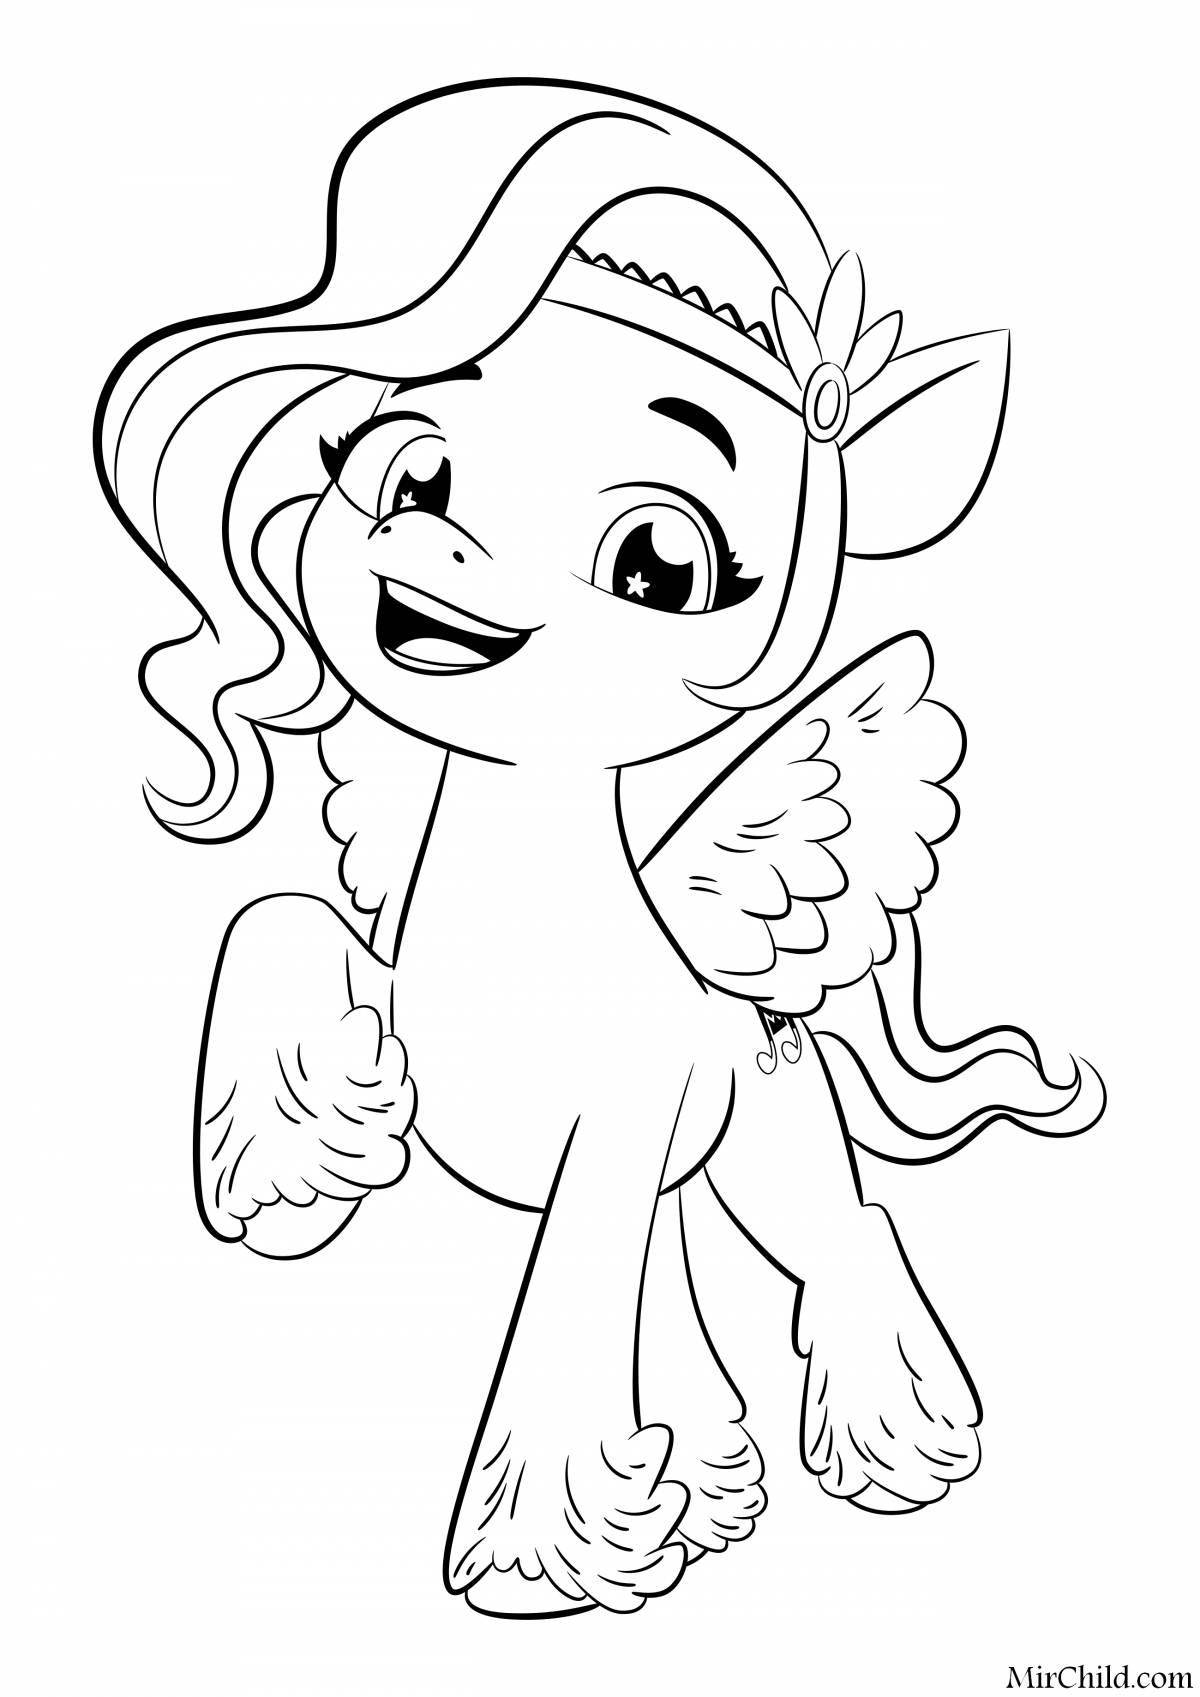 Fancy pony coloring